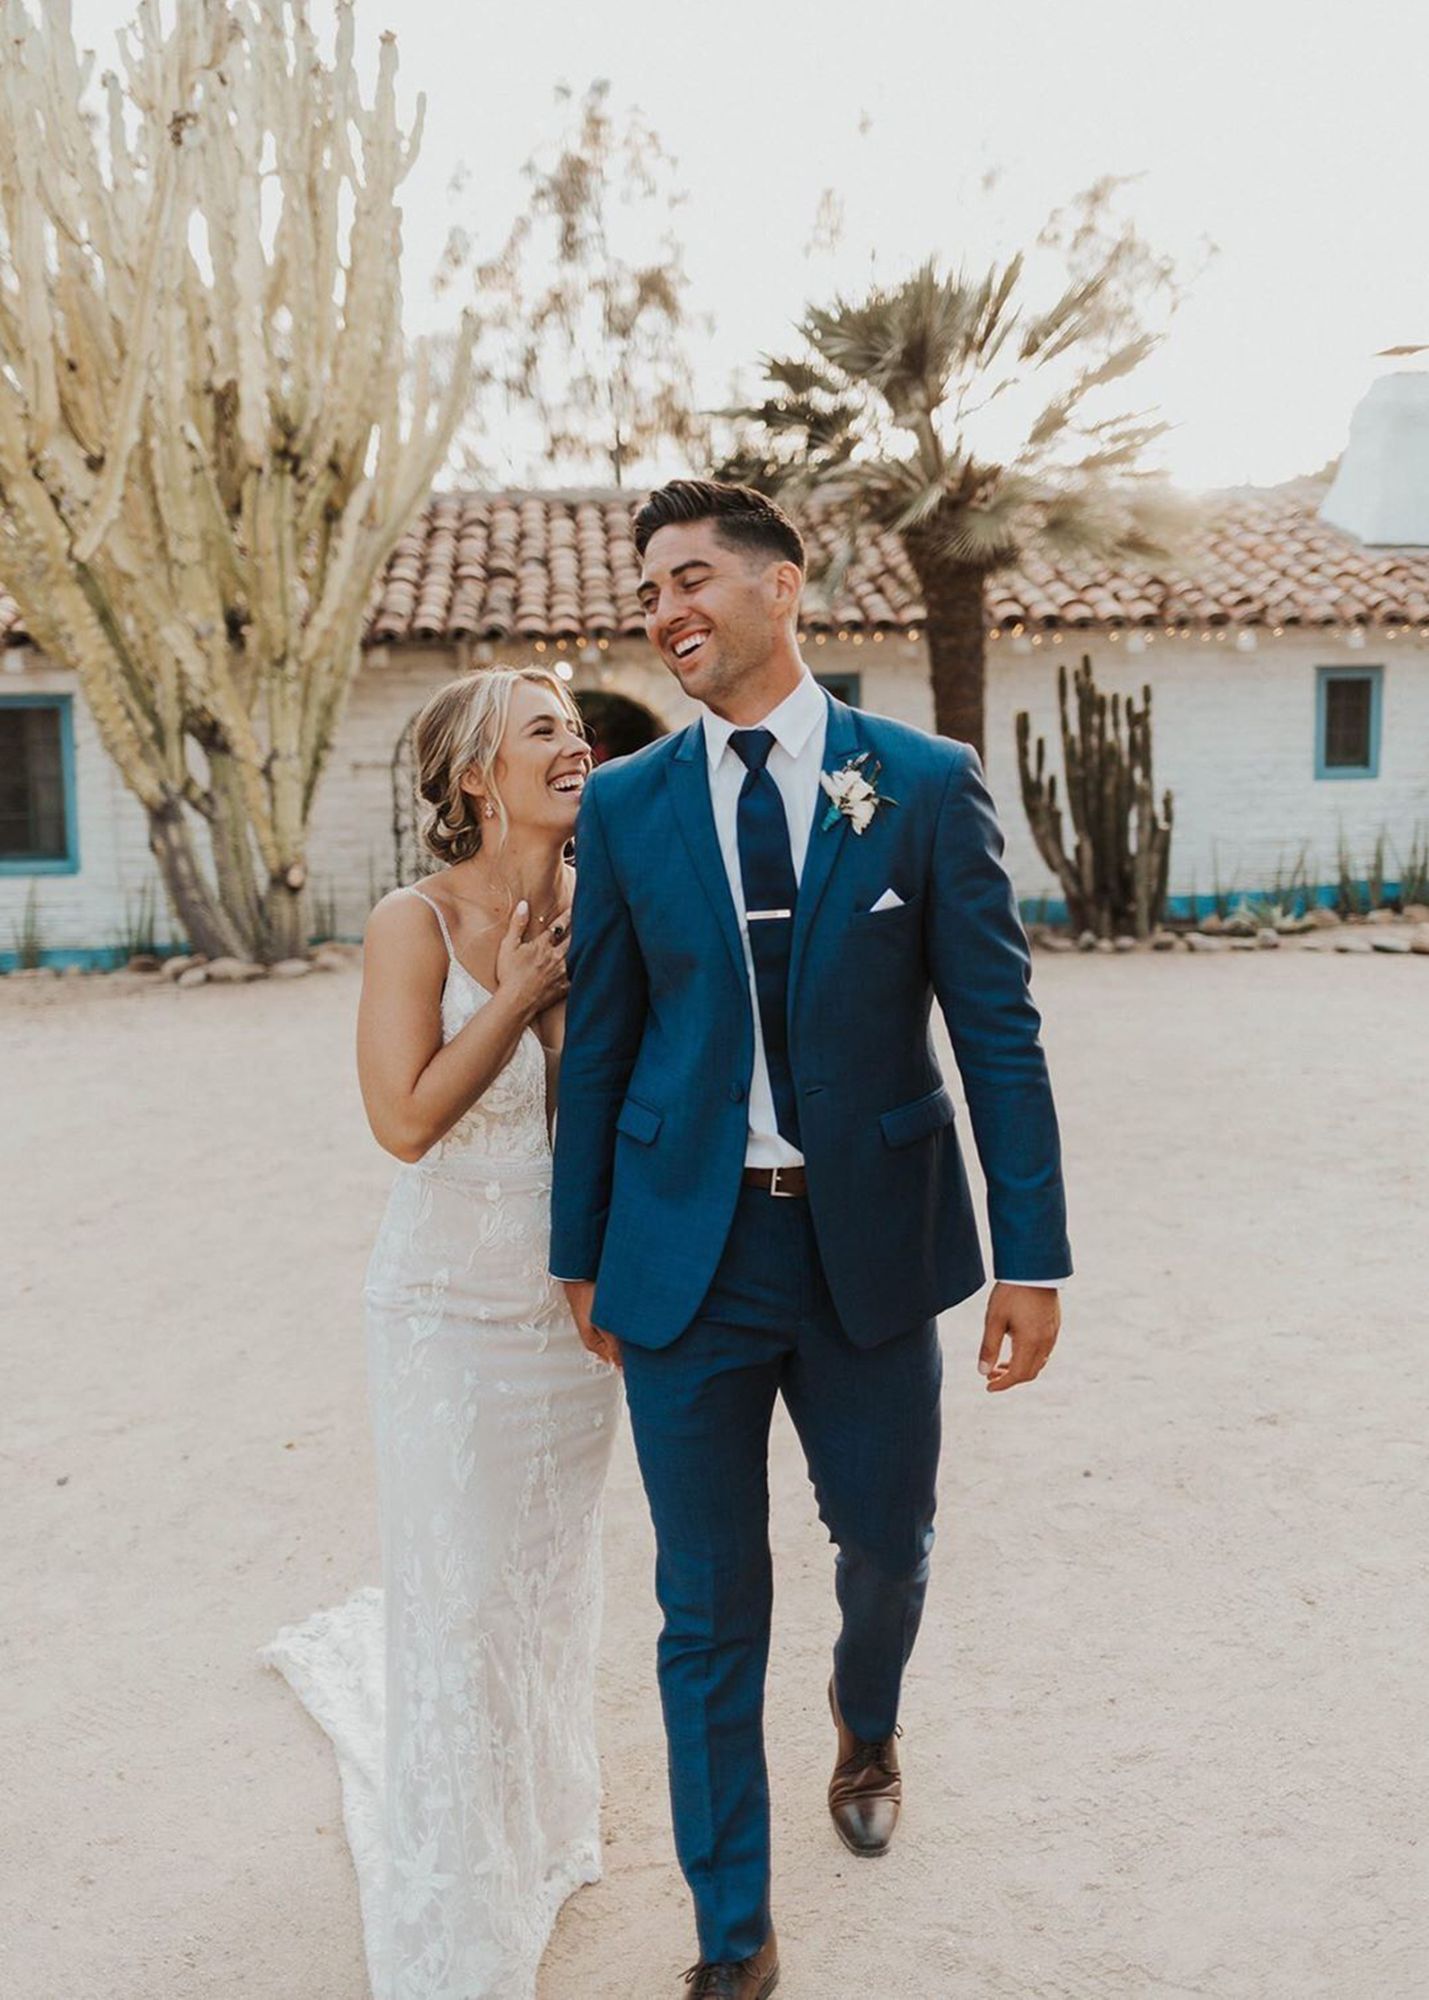 photo of groom wearing a blue suit laughing and holding hands with a bride in white wedding dress